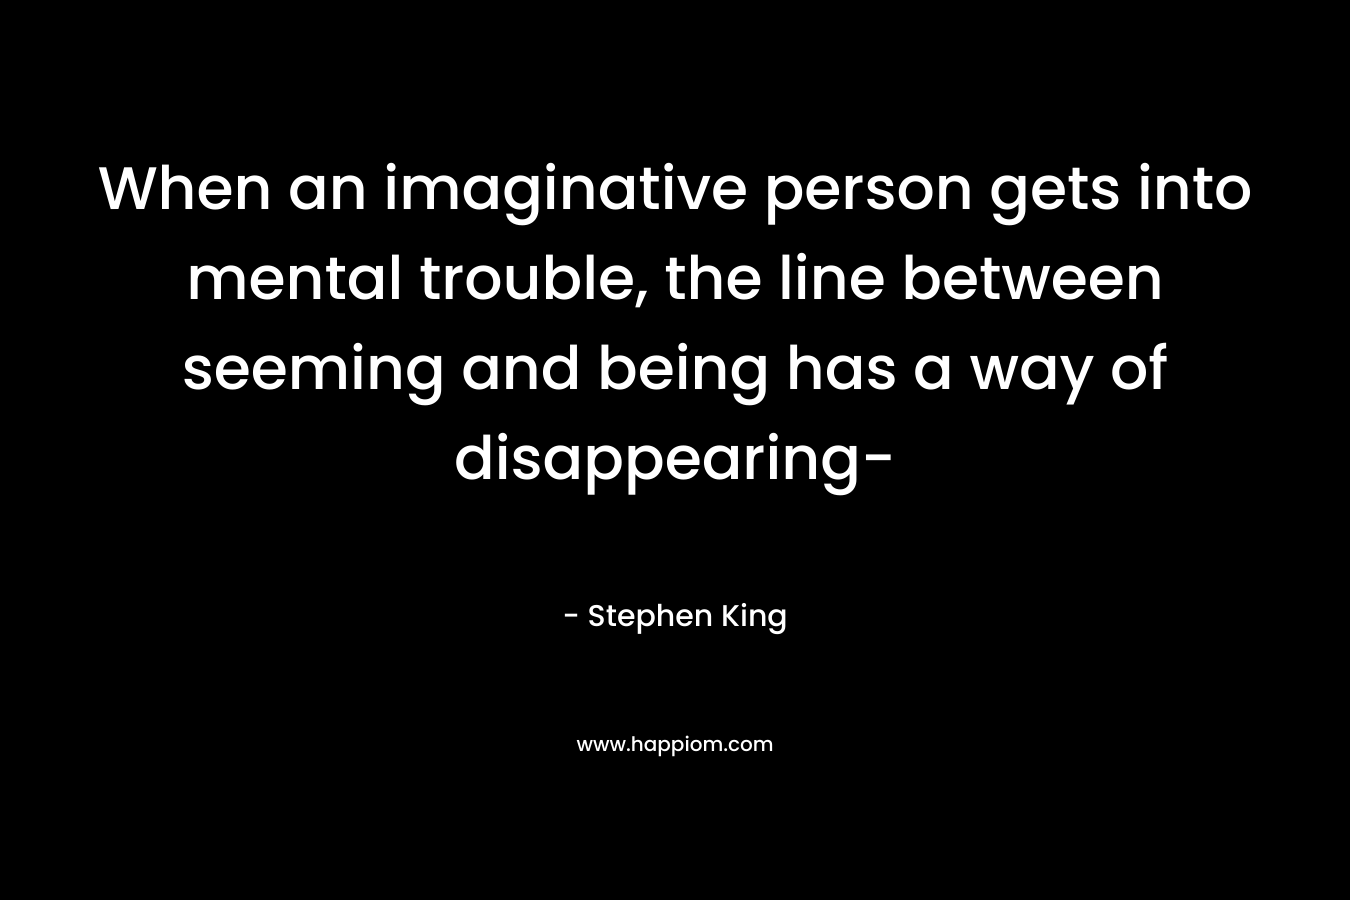 When an imaginative person gets into mental trouble, the line between seeming and being has a way of disappearing-